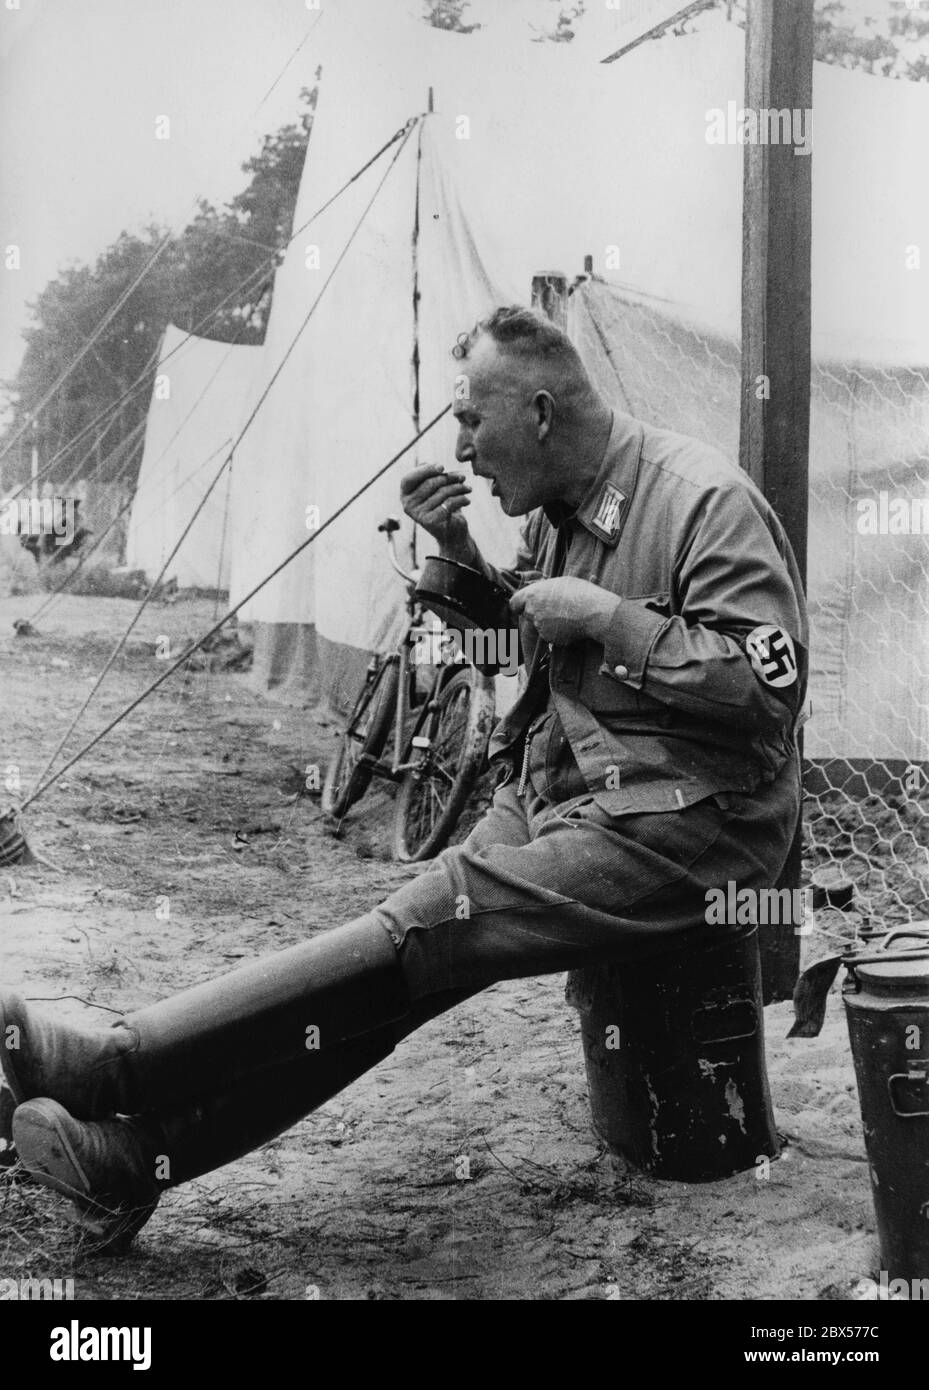 The Gau Saxony of the political leaders of the NSDAP set up their tents in the Langwasser camp during the Reich Party Congress. A party functionary is sitting on a thermos container and eats with his fingers from the lid of a cookware. A bicycle is leaning against the next tent. Stock Photo